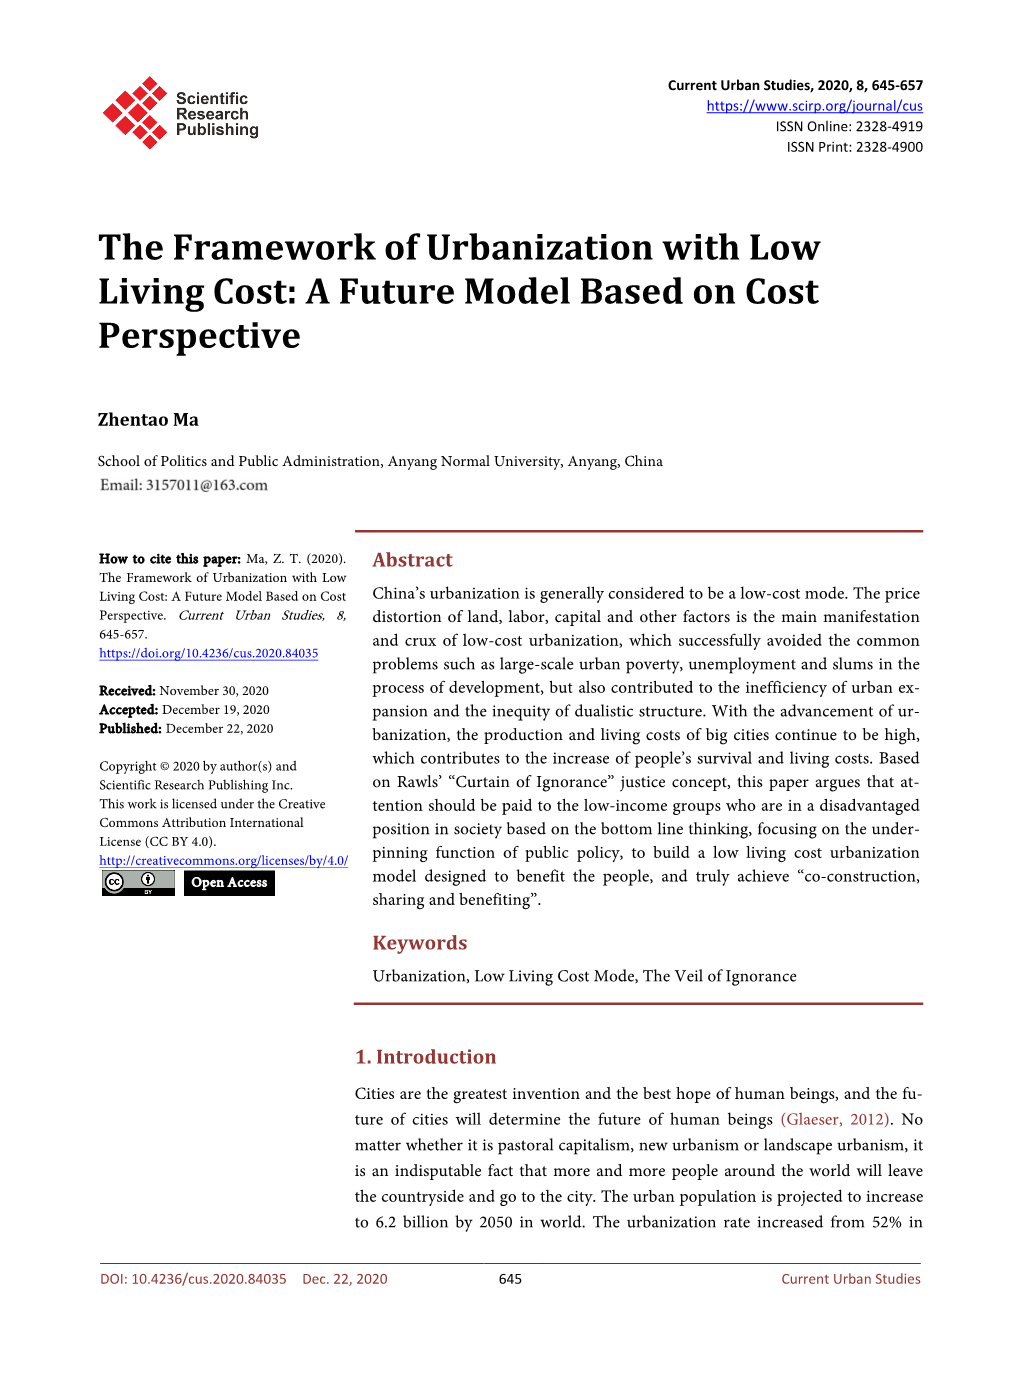 The Framework of Urbanization with Low Living Cost: a Future Model Based on Cost Perspective